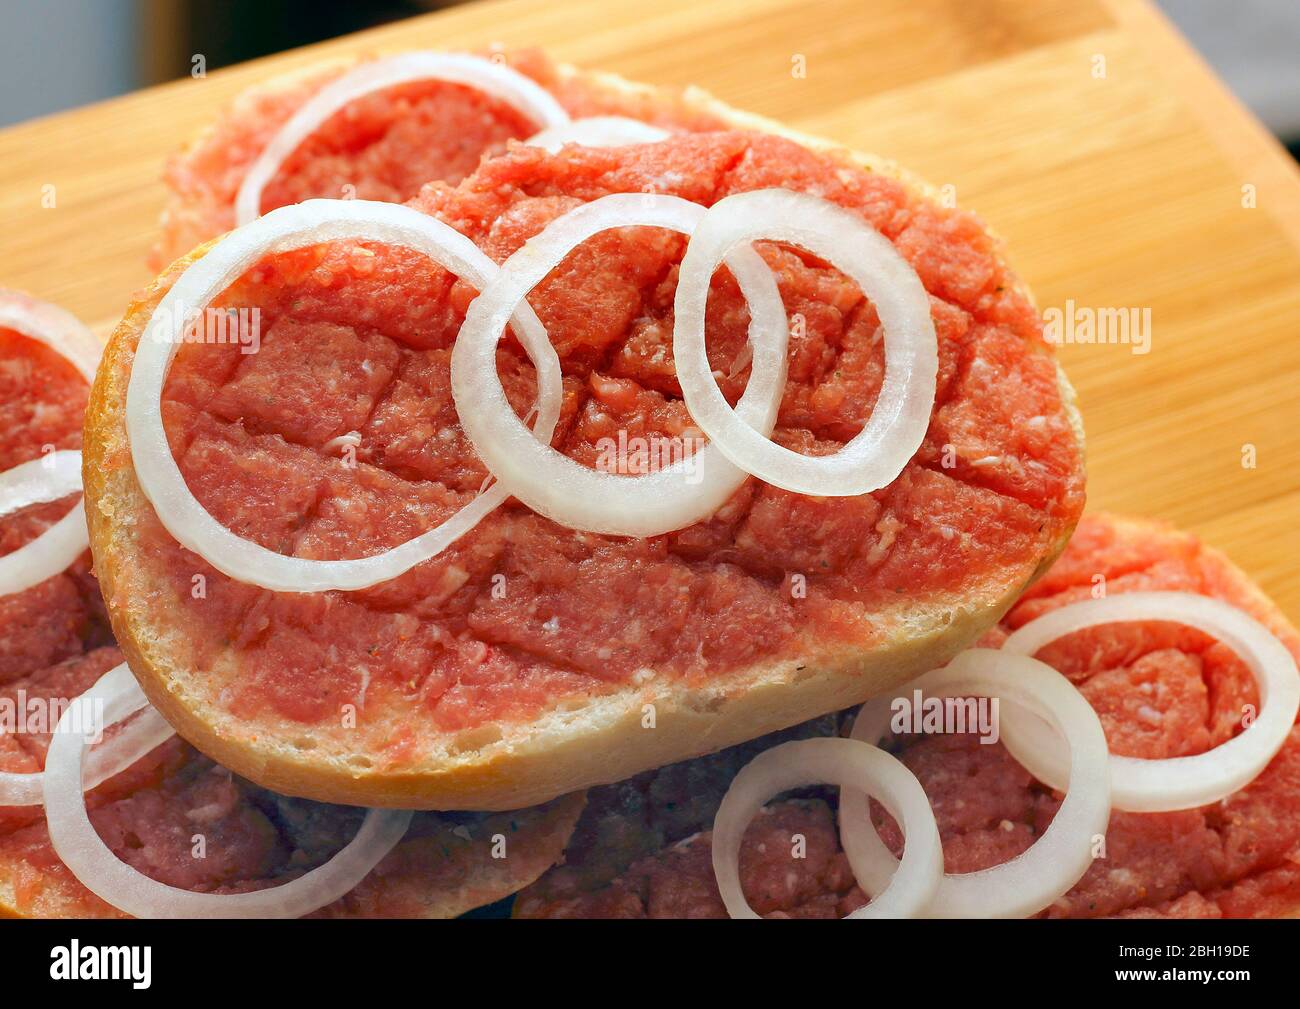 half Mett on bread rolls with onion rings on a plate, Germany Stock Photo